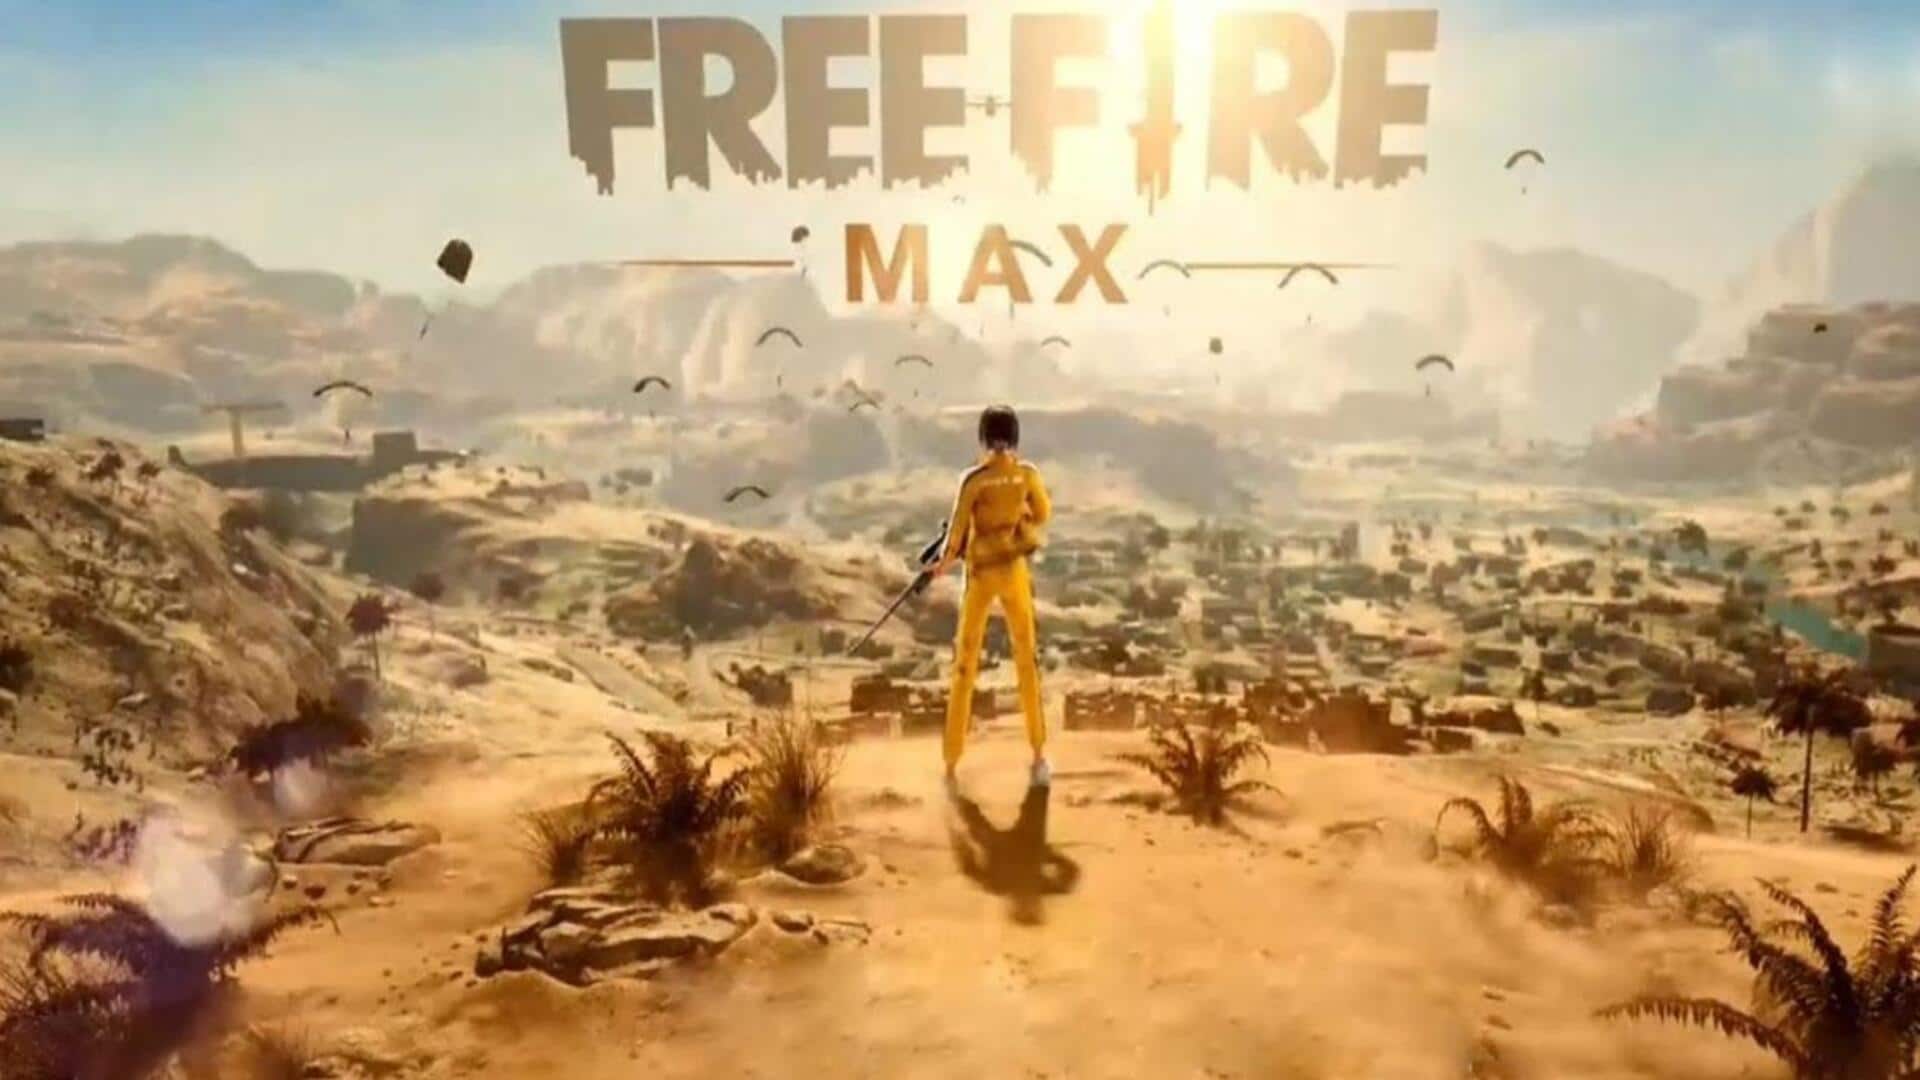 Free Fire MAX codes for November 9: Claim exclusive rewards